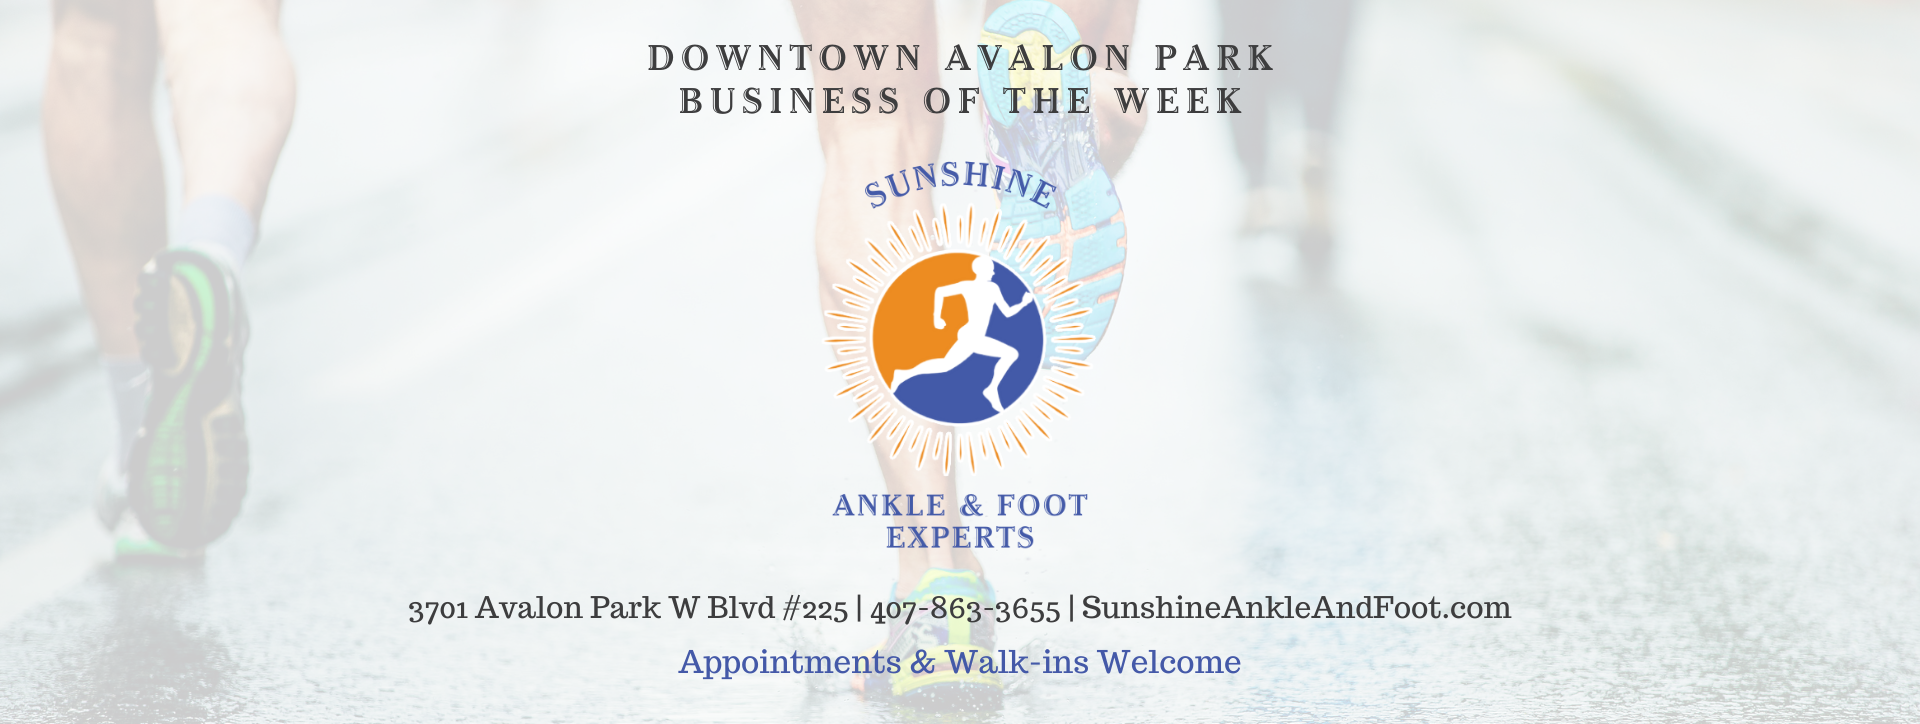 Downtown Avalon Park Business Of The Week: Sunshine Ankle And Foot ...